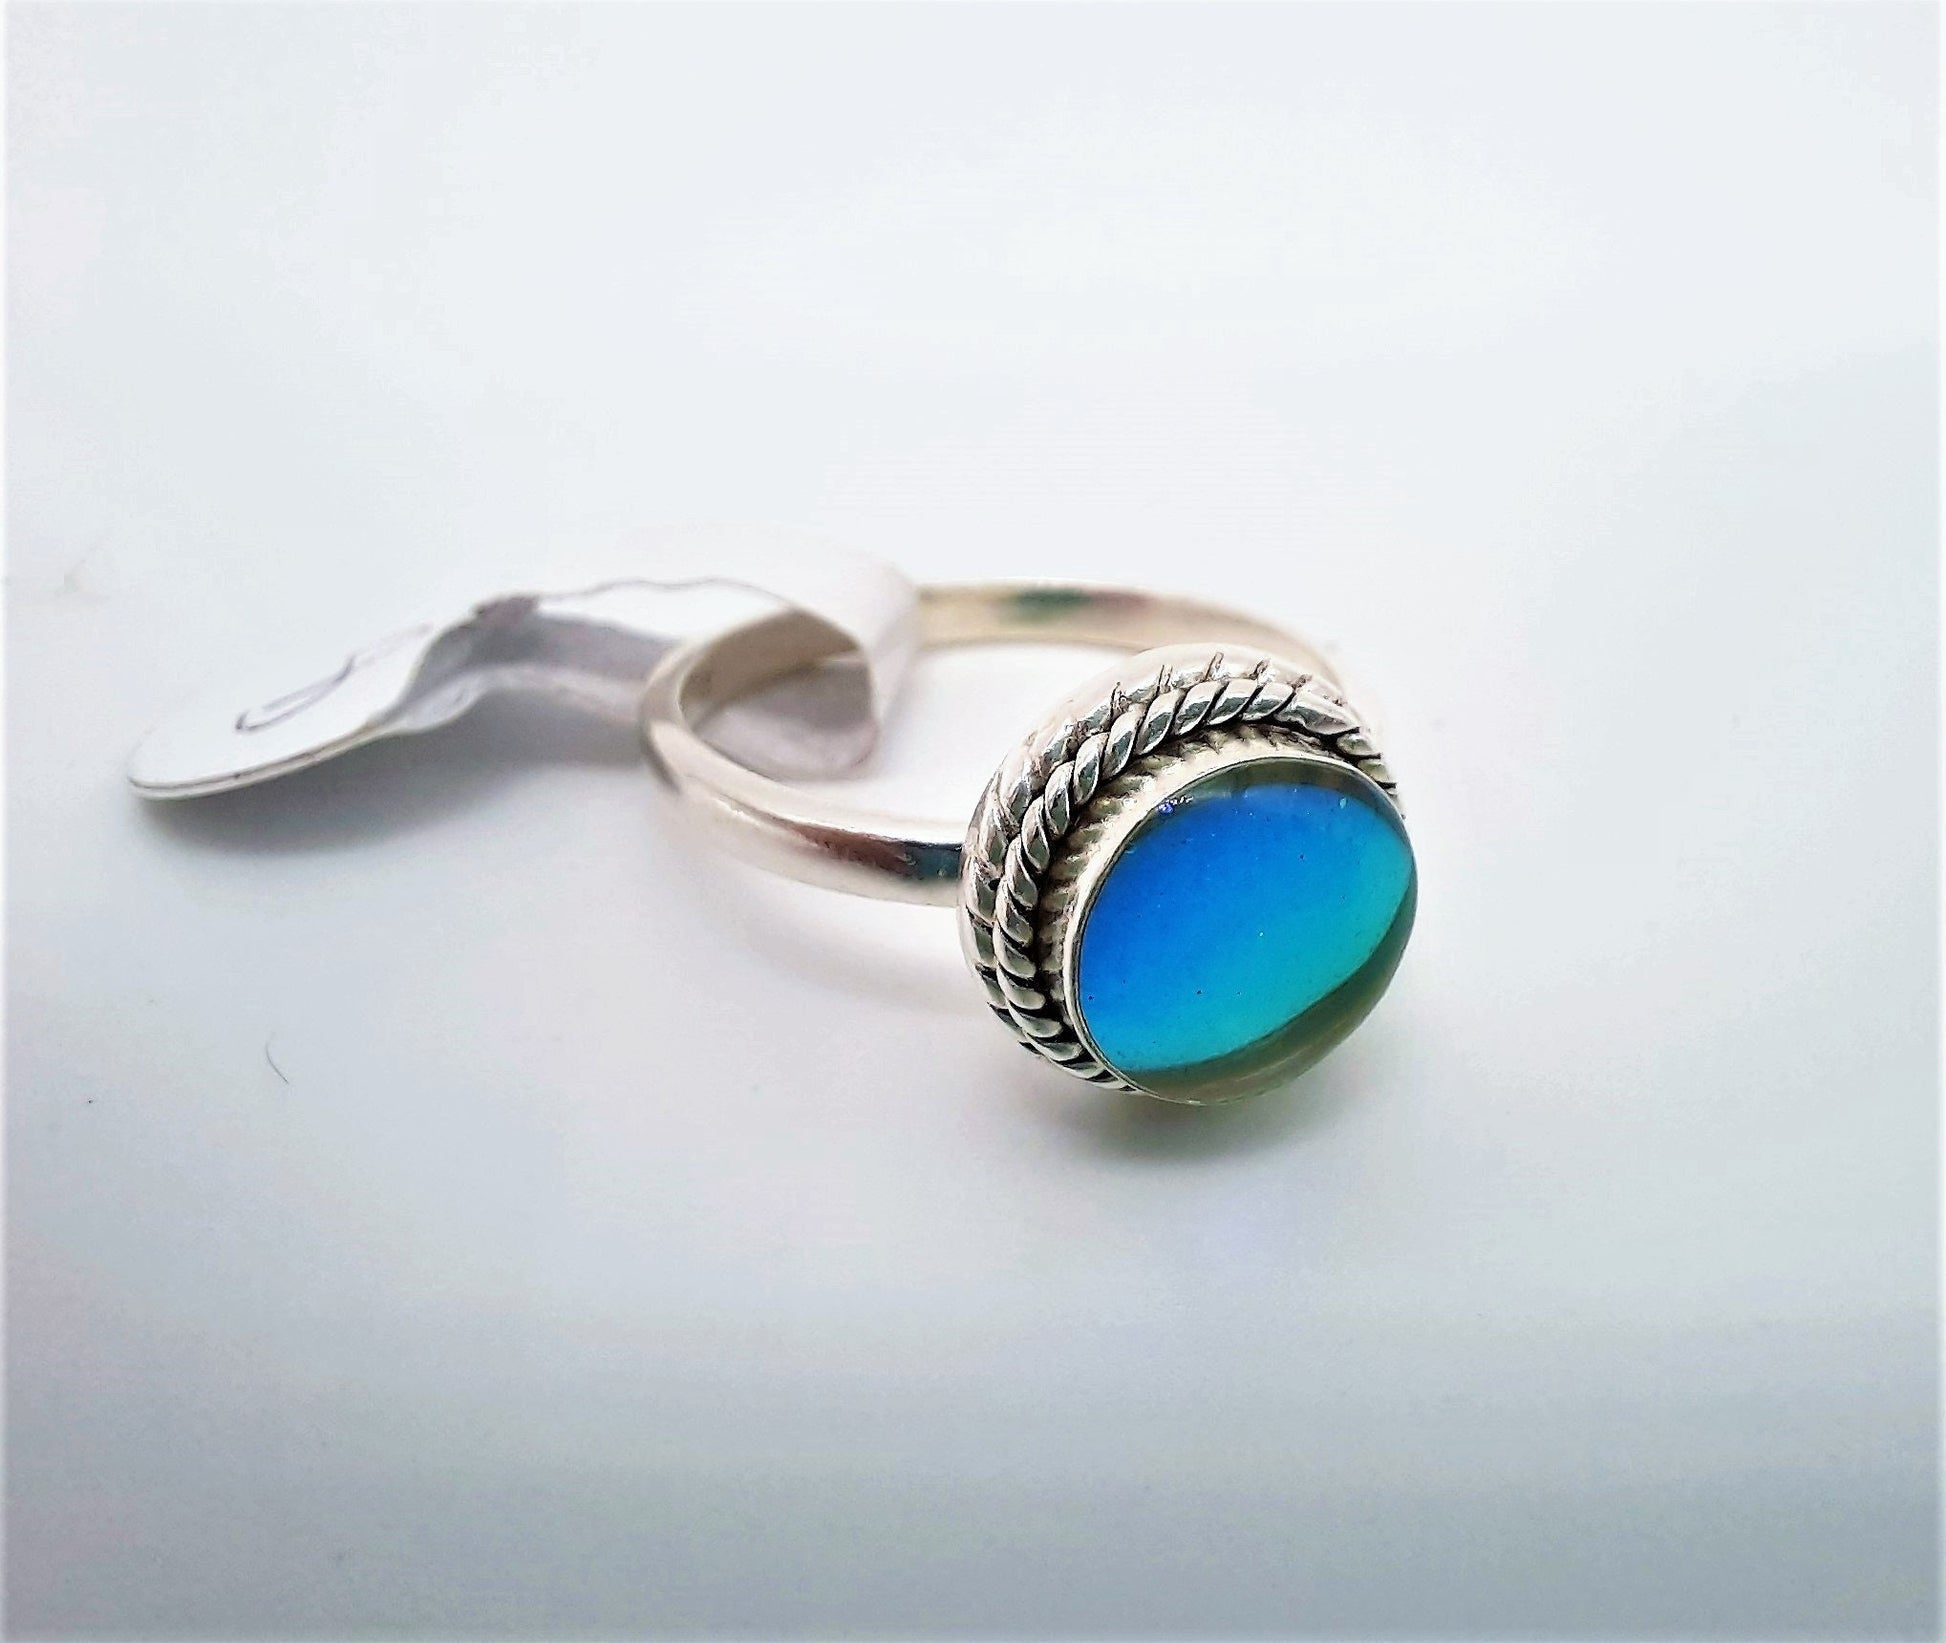 Handcrafted Double Spiral Rope Design 925 Sterling Silver Iridescent "Mirror Ball" Ring, Size 6, Sealed with Holographic Mica Infused Resin